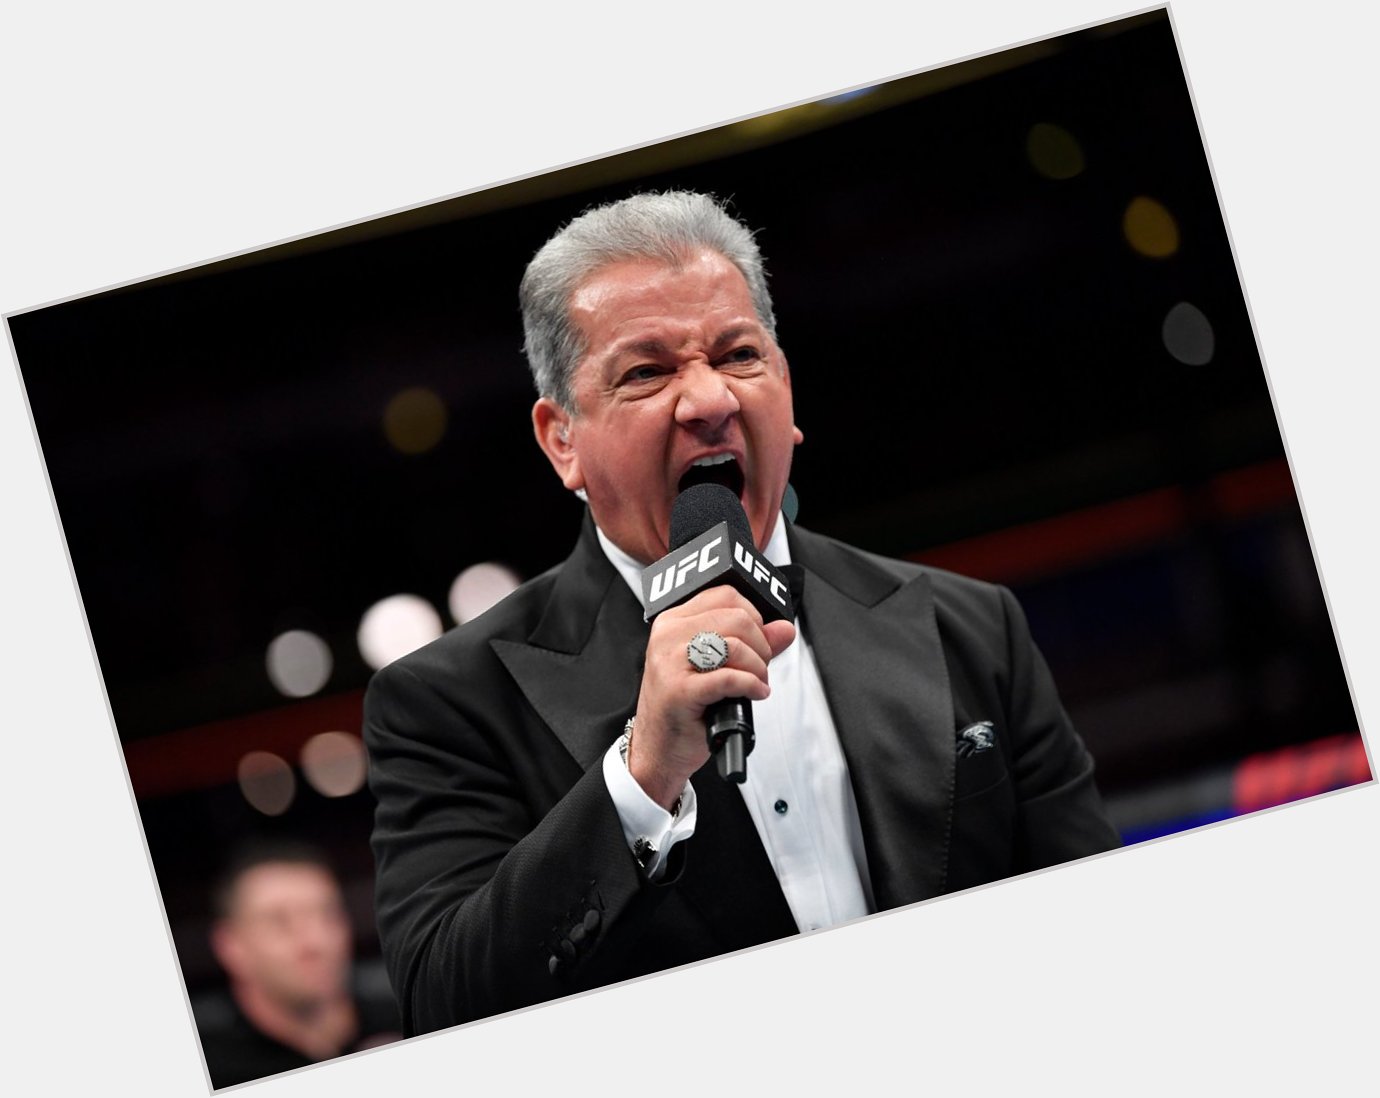 Happy Birthday, Bruce Buffer!

The yelling is kinda annoying but you seem like a swell guy. 